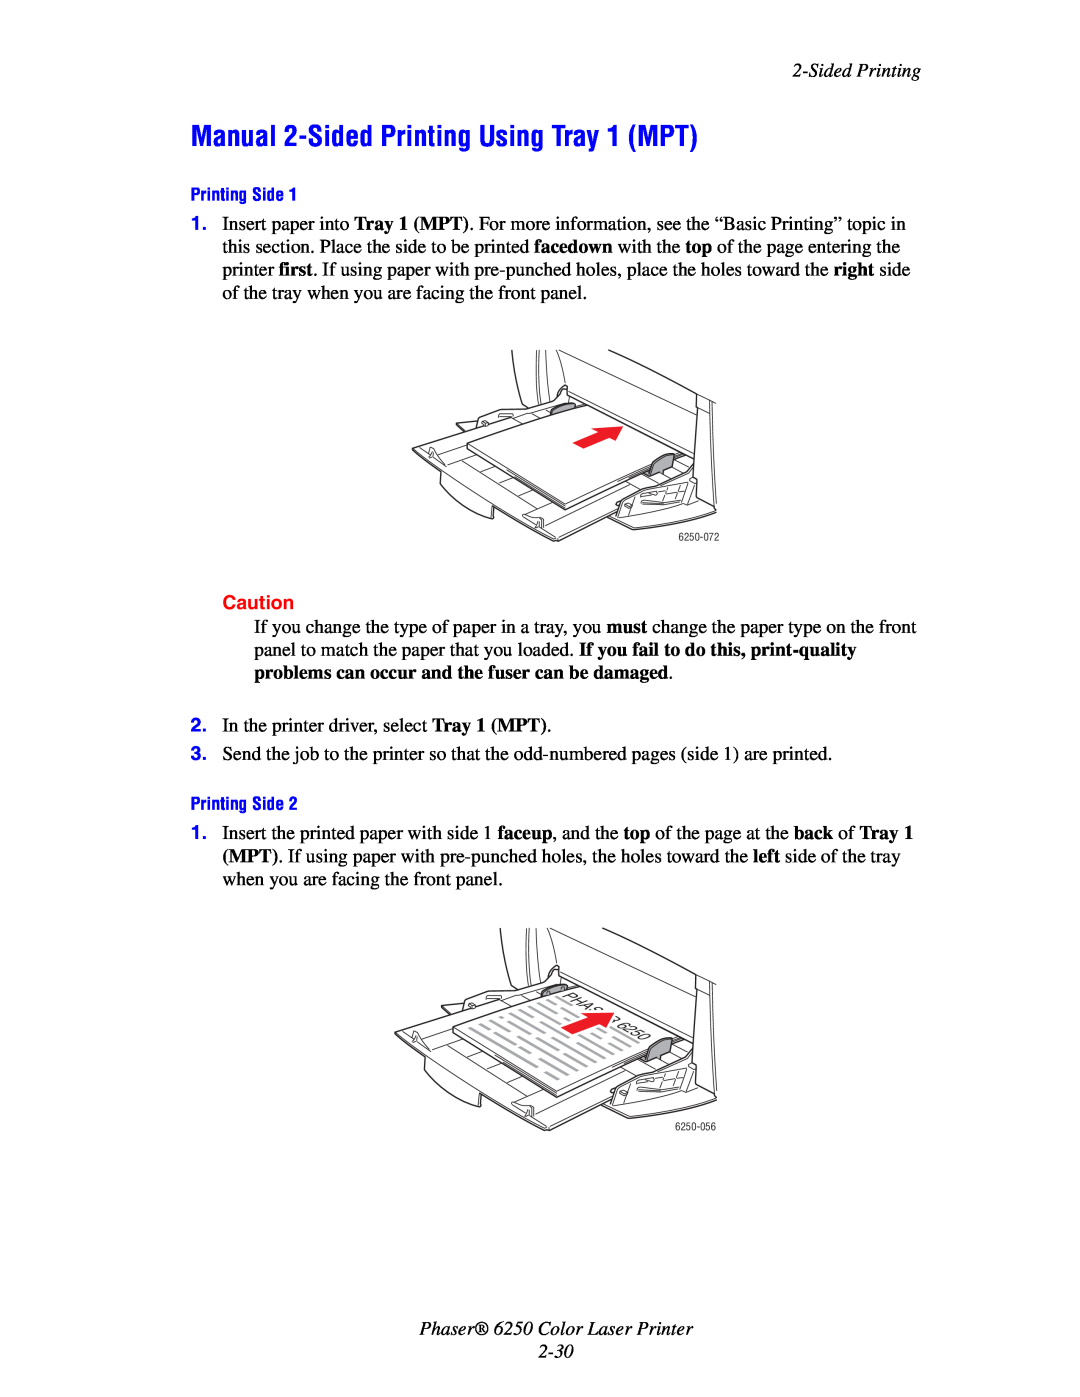 Xerox manual Manual 2-Sided Printing Using Tray 1 MPT, Phaser 6250 Color Laser Printer 2-30 